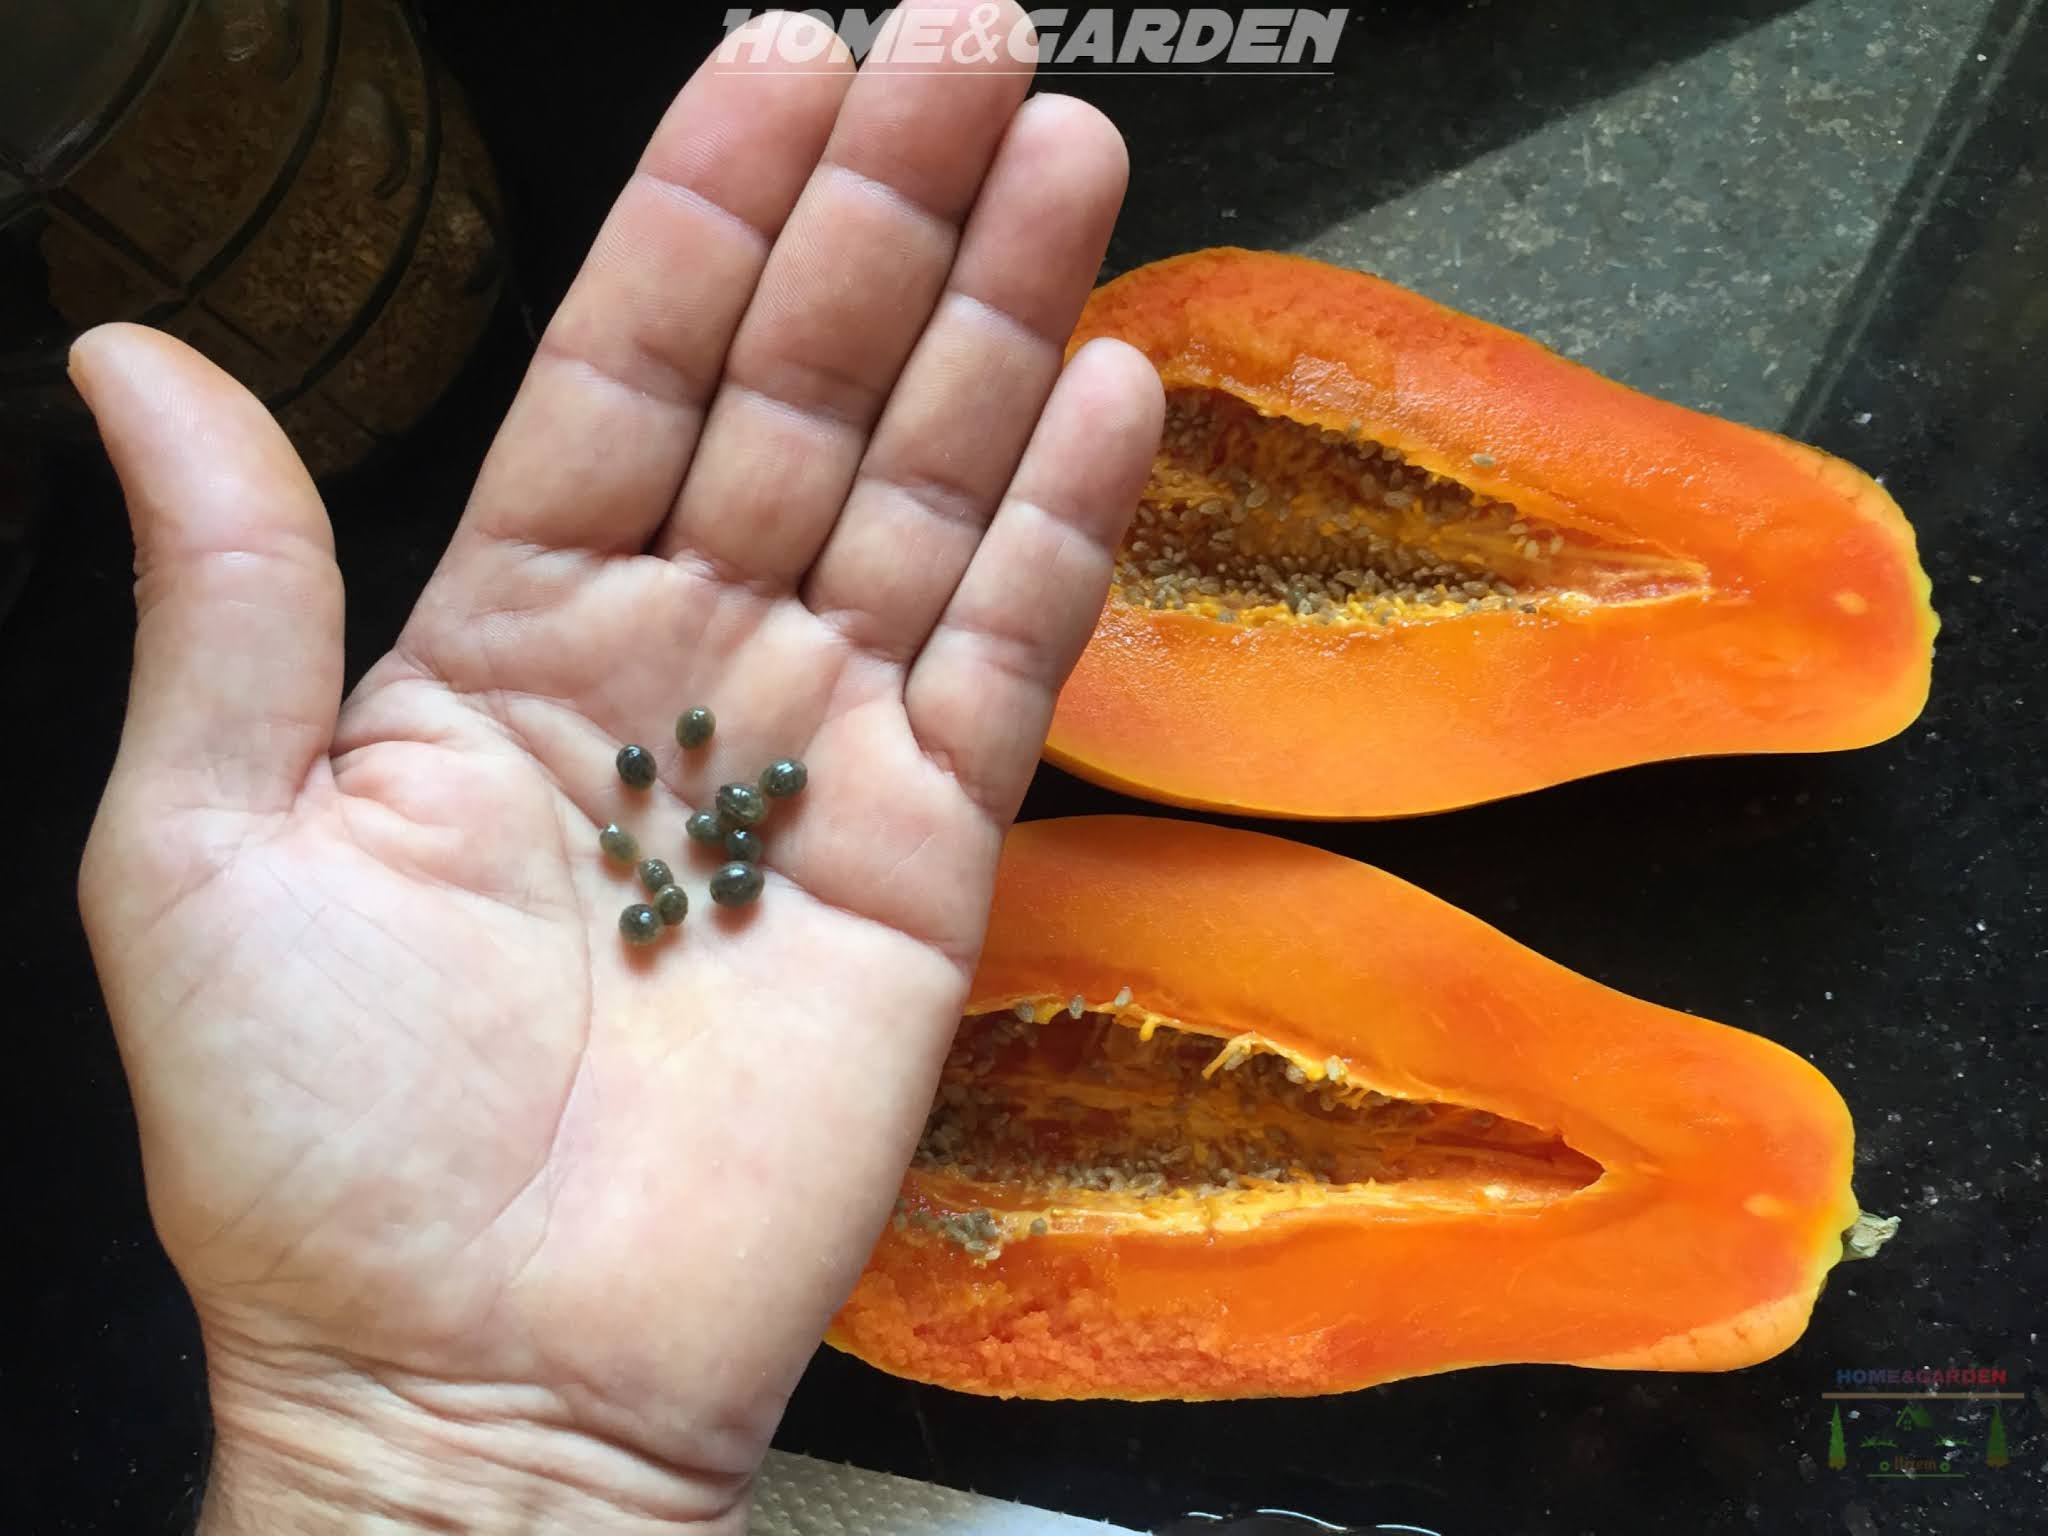 Growing papaya from seed is the easiest and most successful way to get started. And of course it's also the cheapest. You can grow papayas using seed from shop bought papayas.